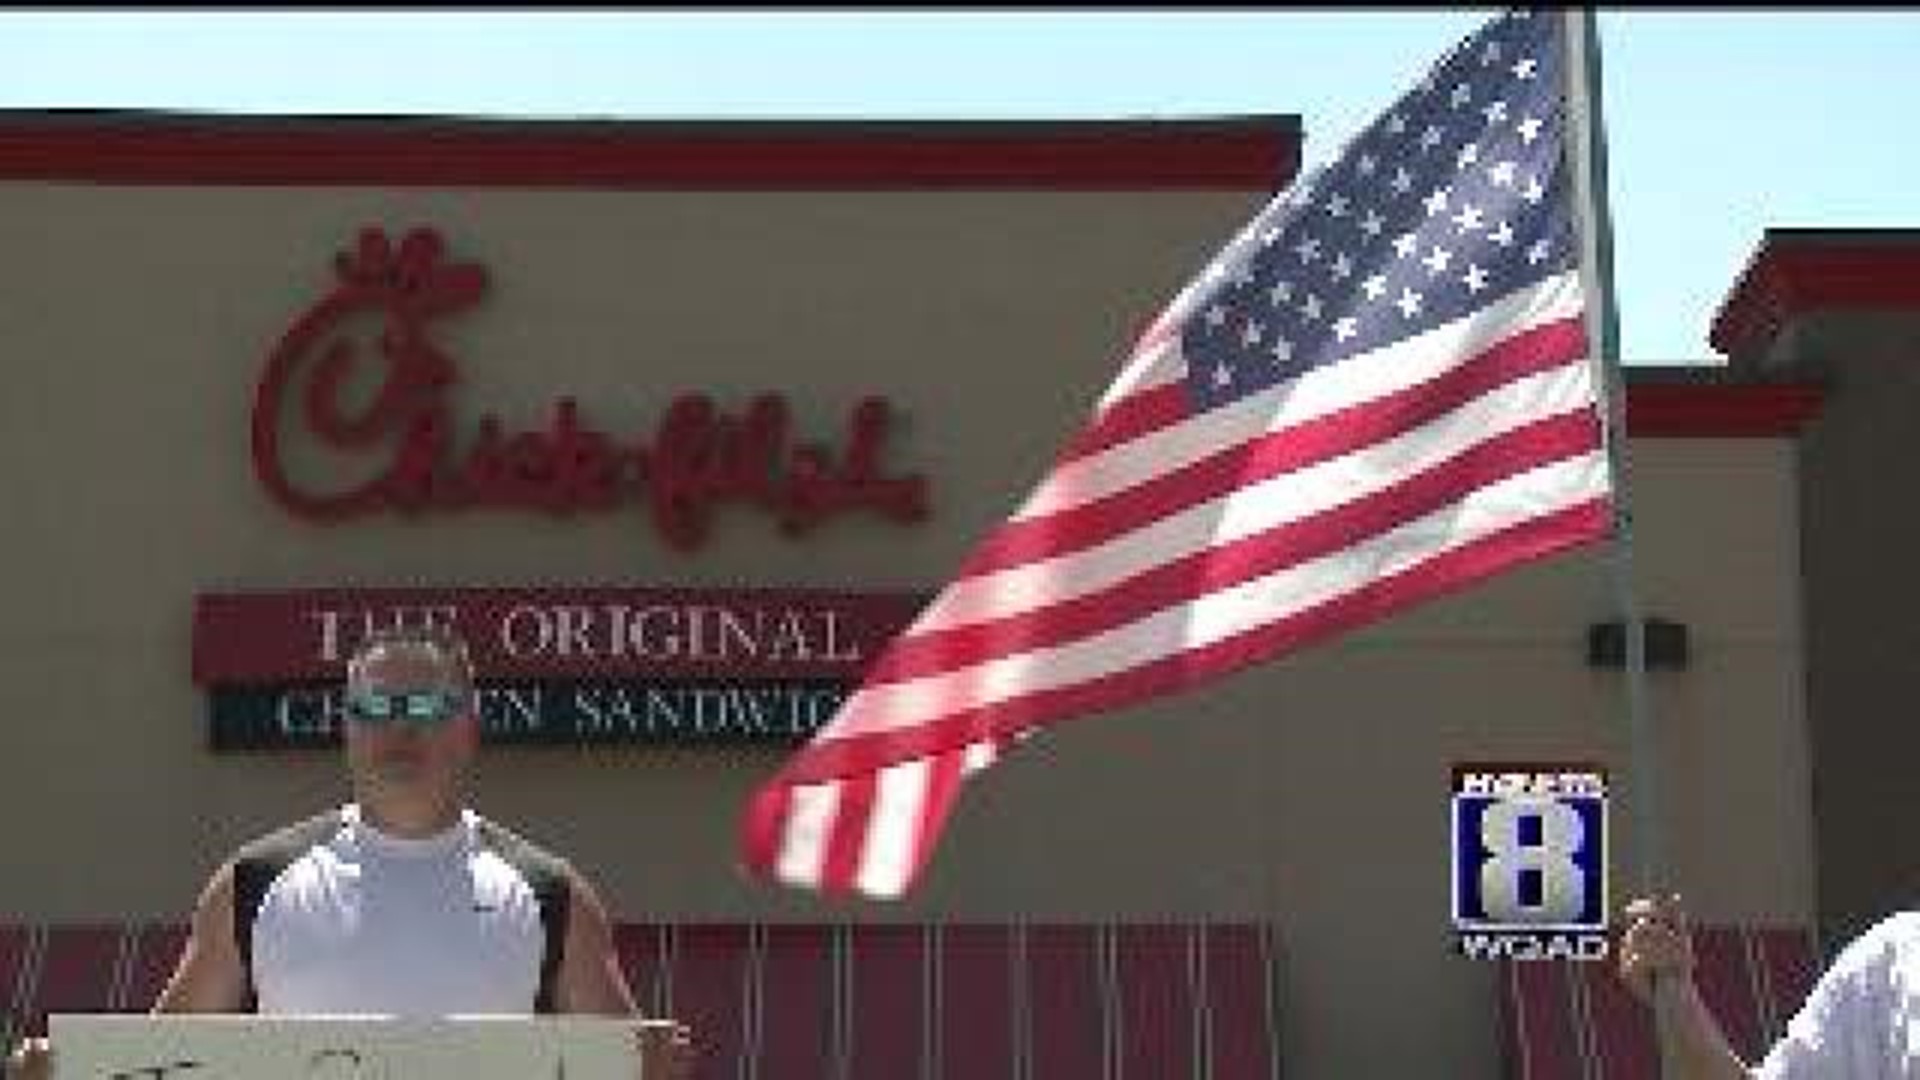 Demonstrators support Chick-fil-A